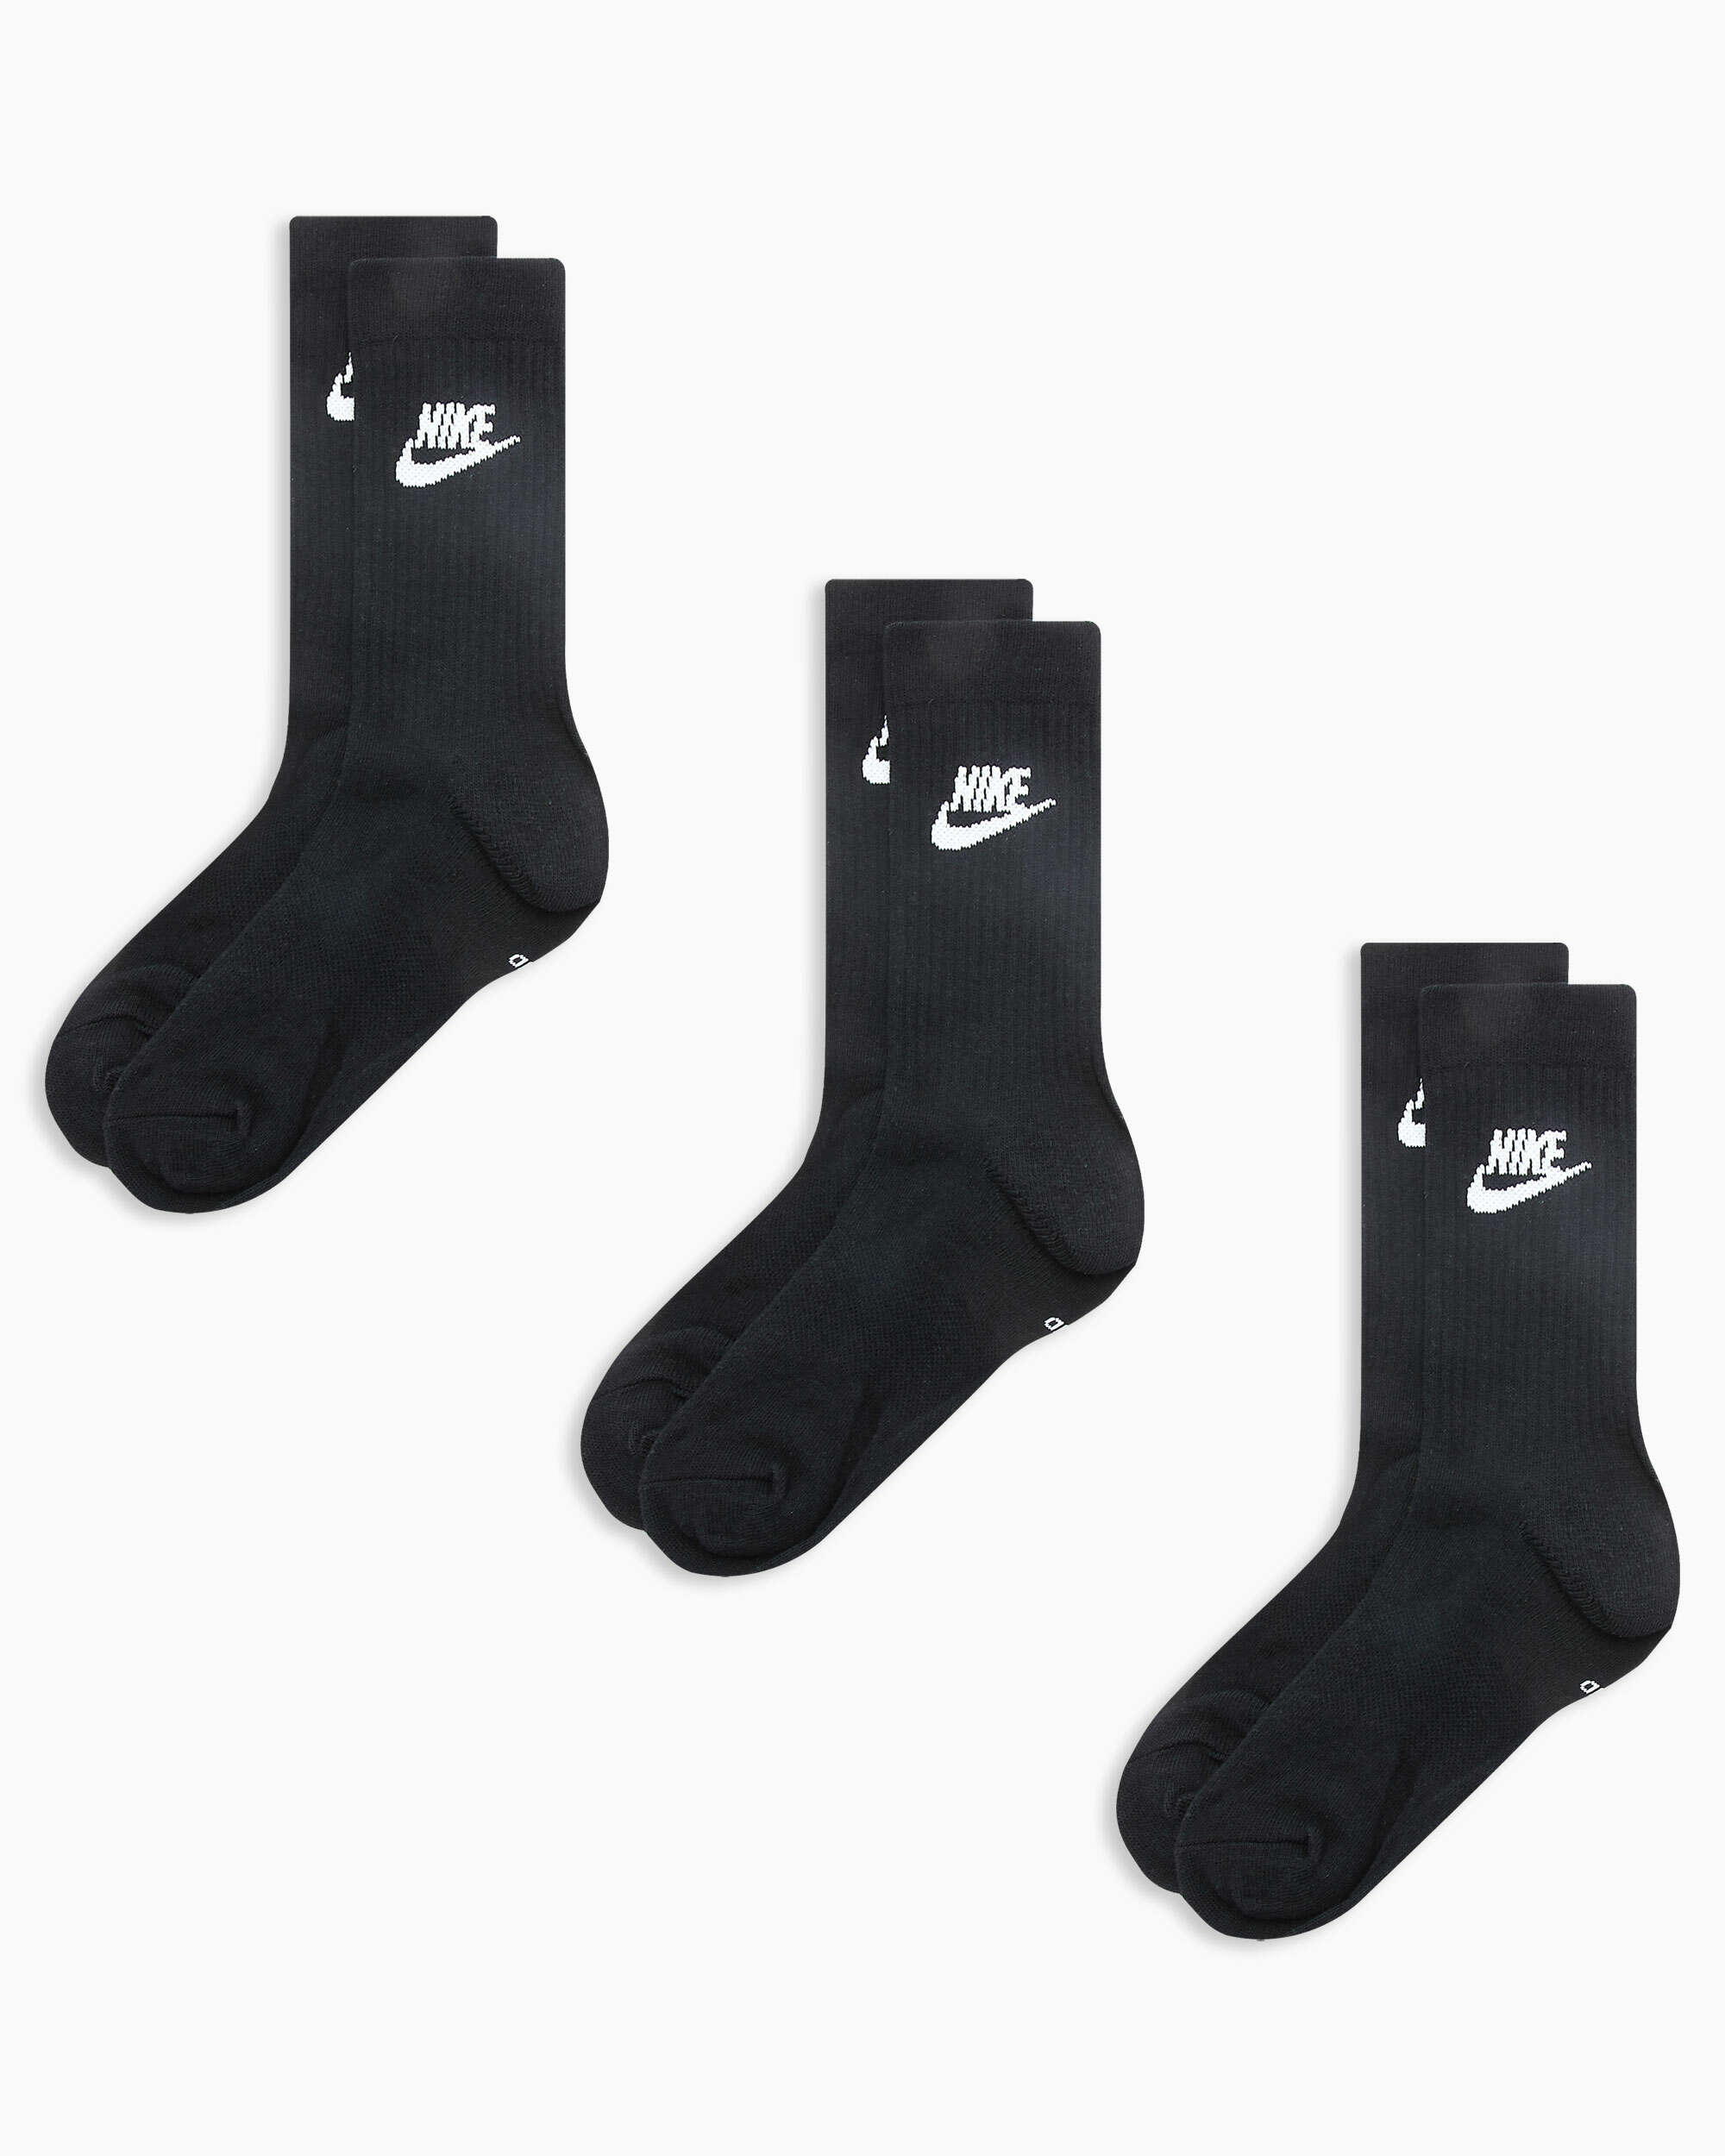 Chaussettes Nike Everyday Essential Crew 3 Pack Unisex Noir SK0109-010